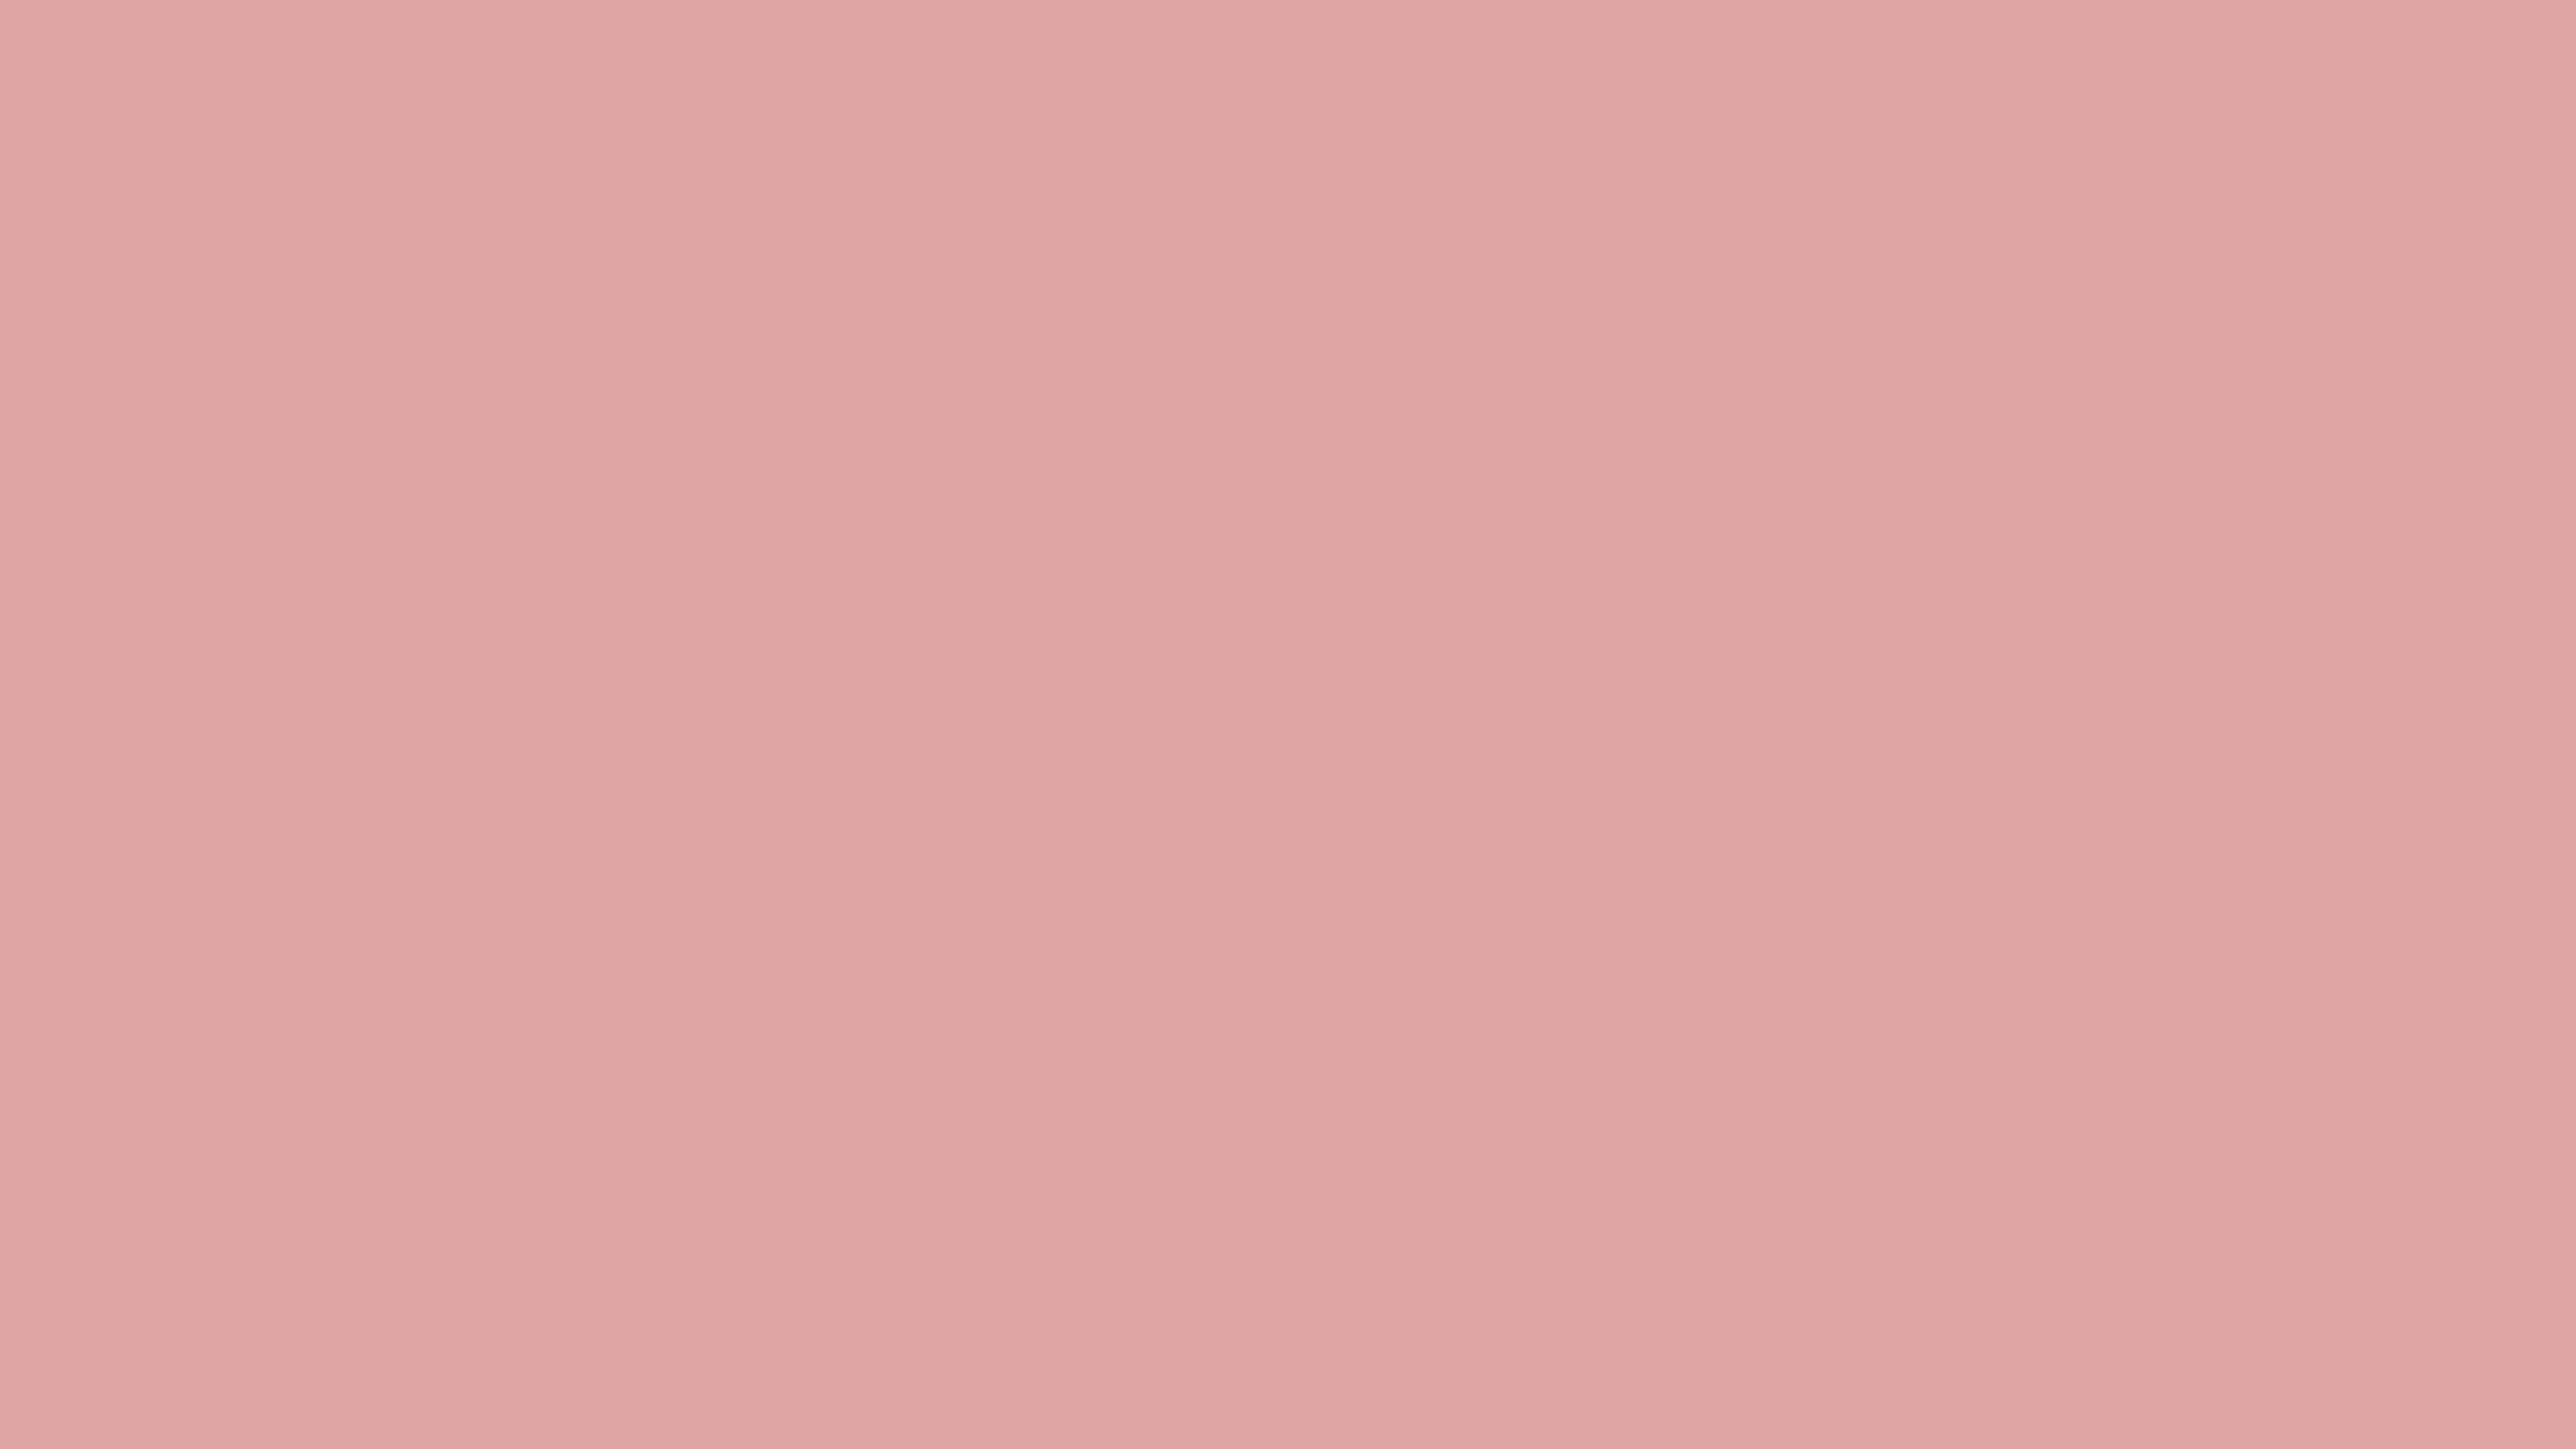 5120x2880 Pastel Pink Solid Color Background